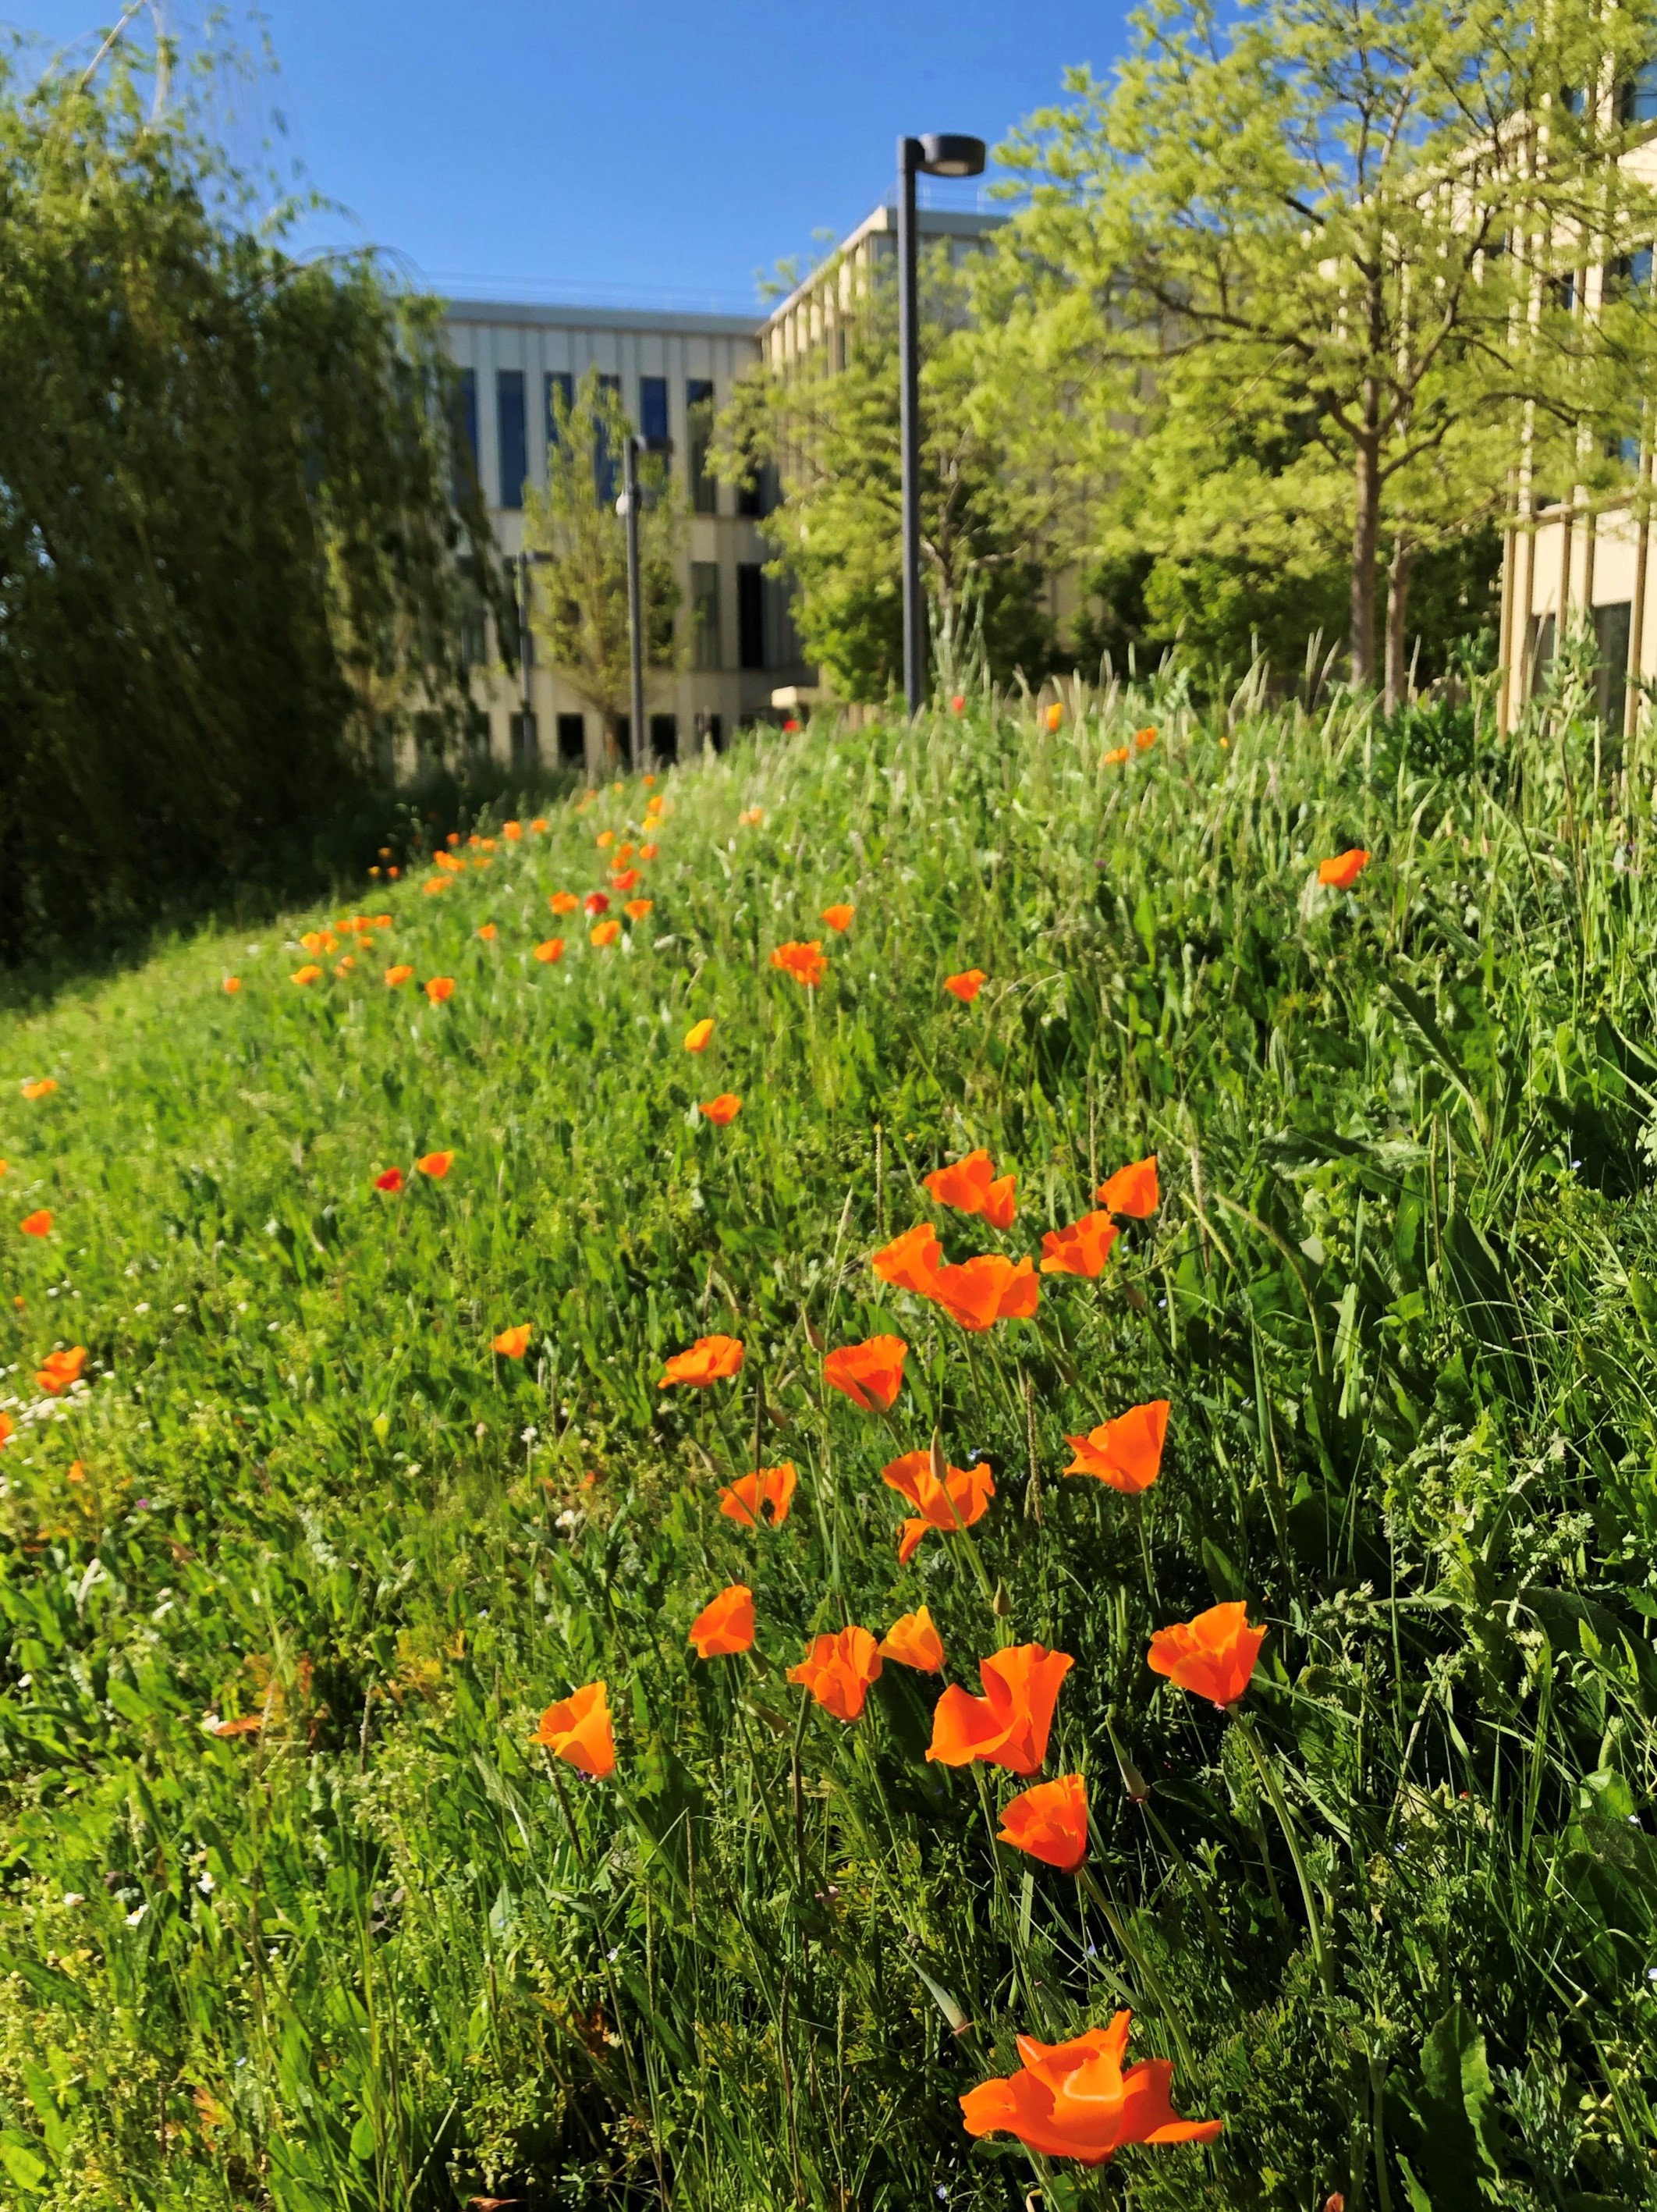 Bright orange daisies in the grass, with the HEC MBA building and trees in the background